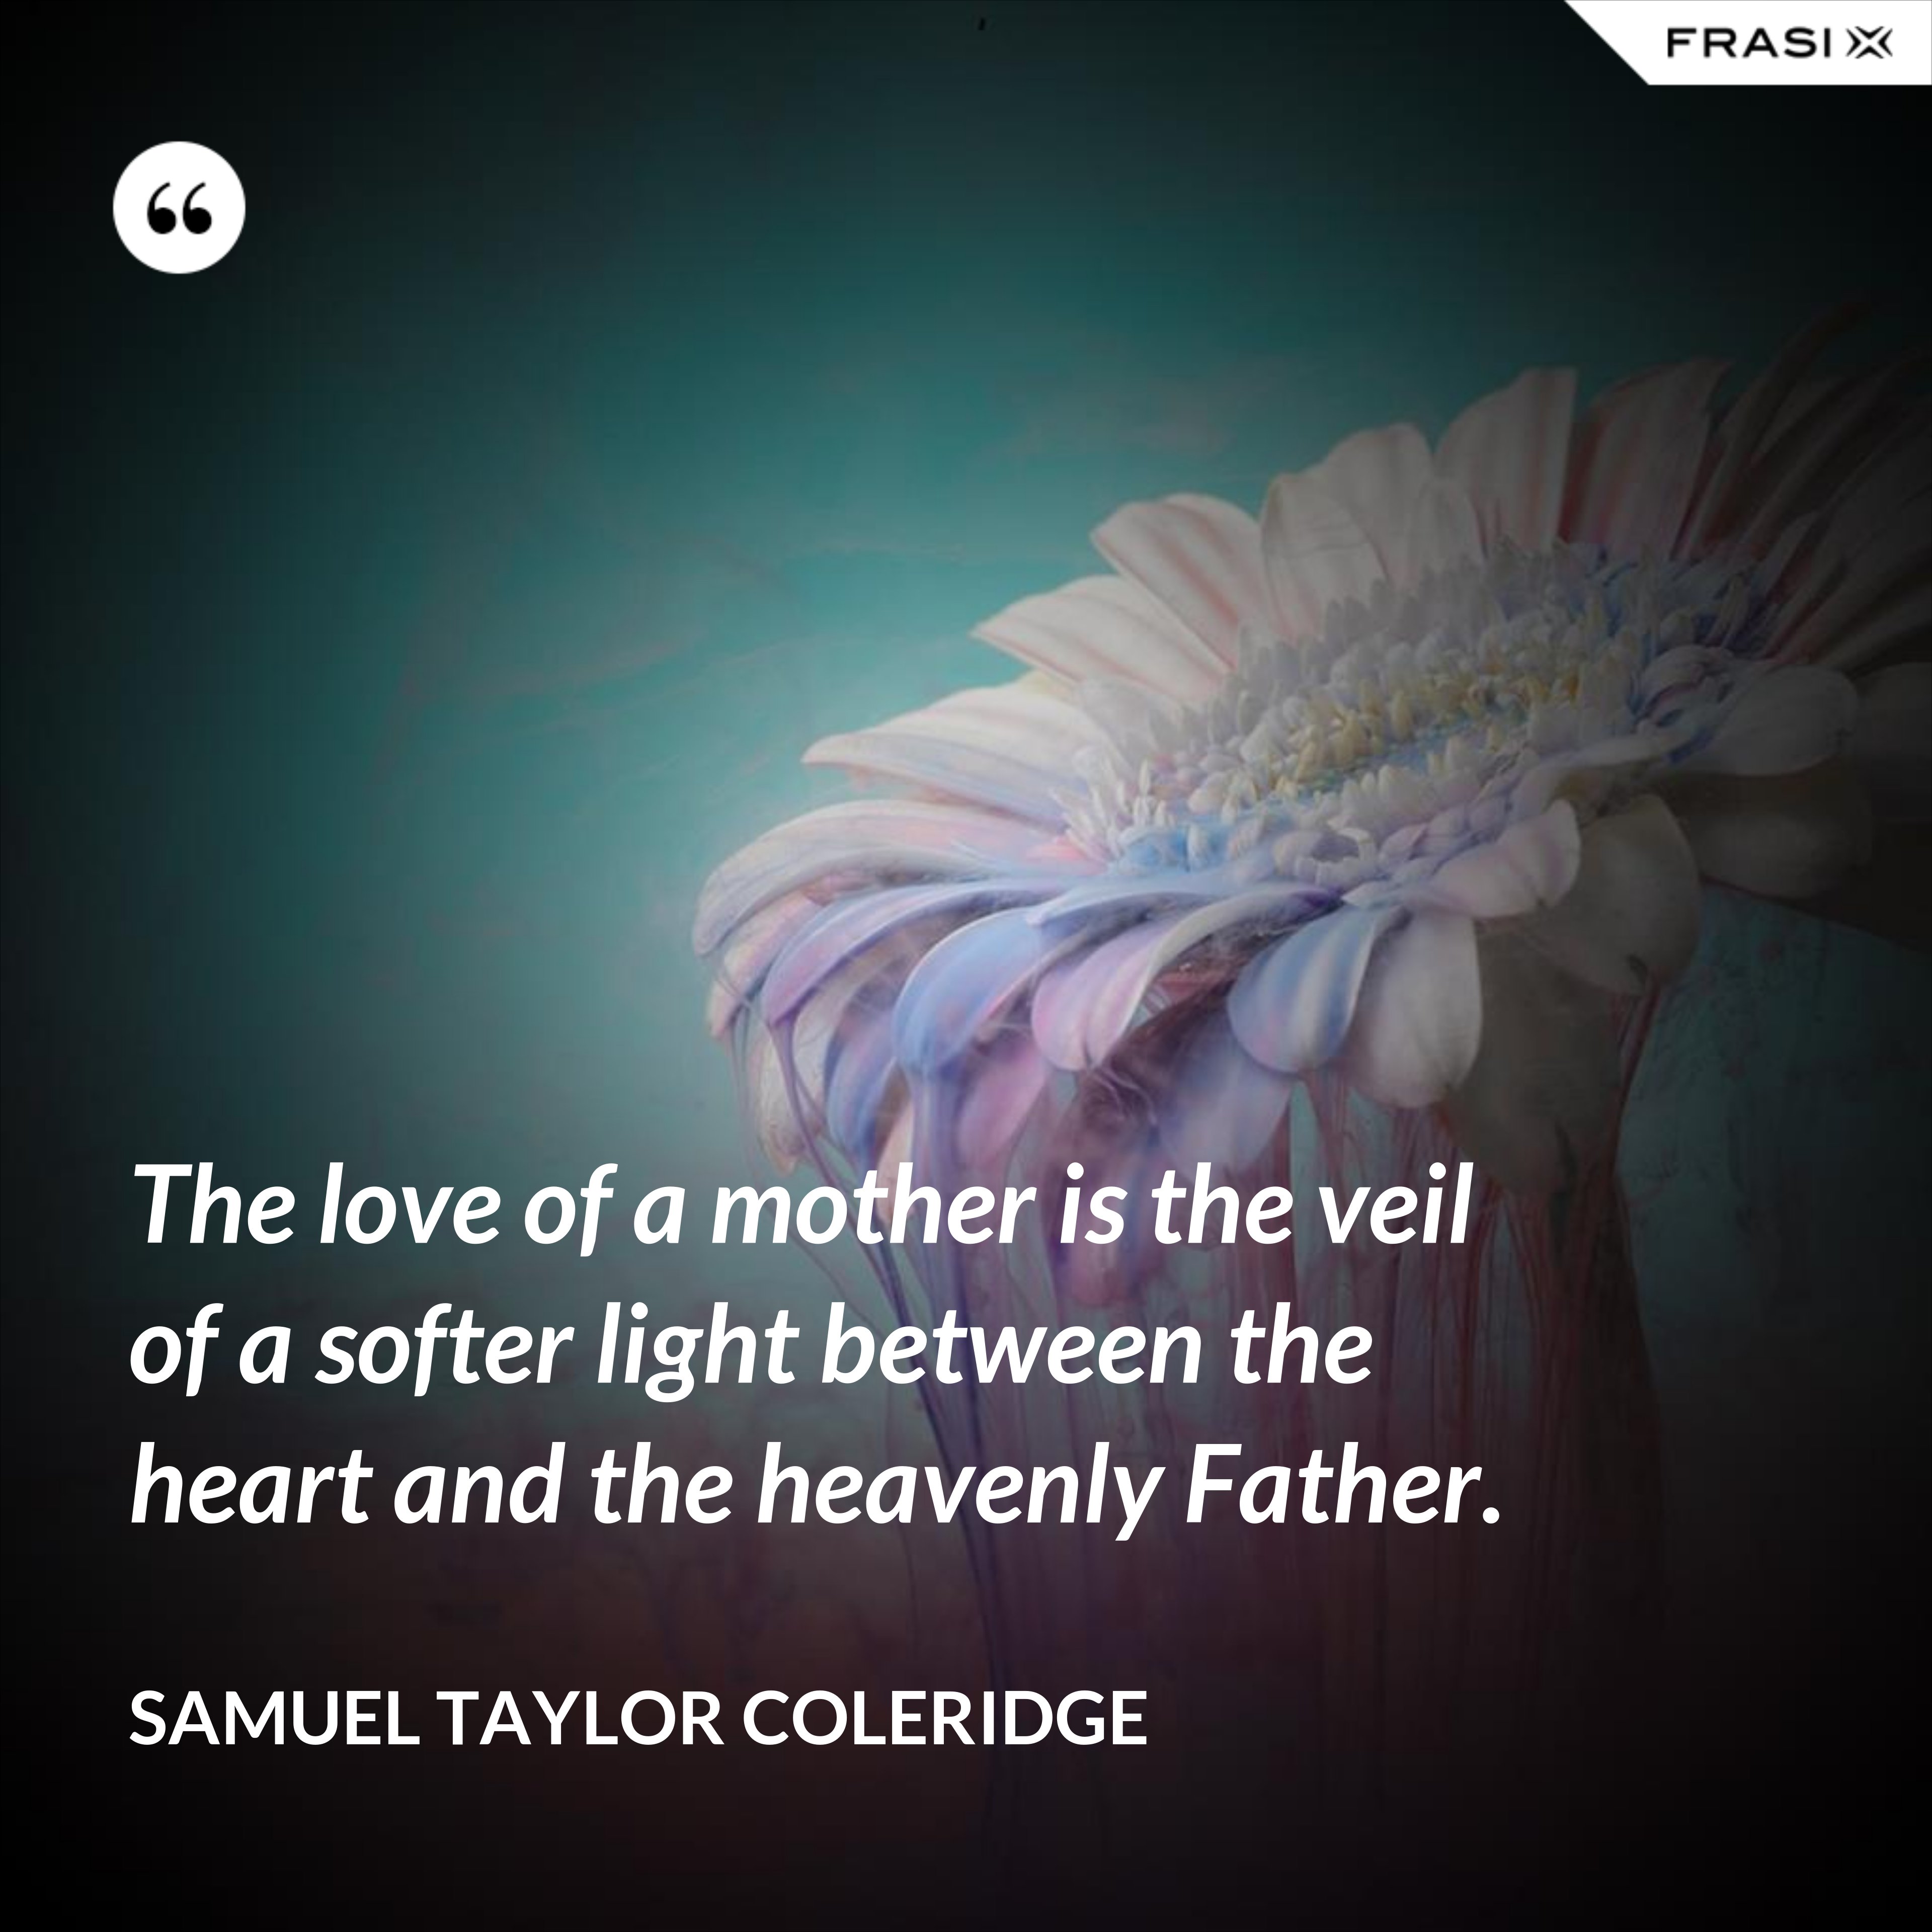 The love of a mother is the veil of a softer light between the heart and the heavenly Father. - Samuel Taylor Coleridge